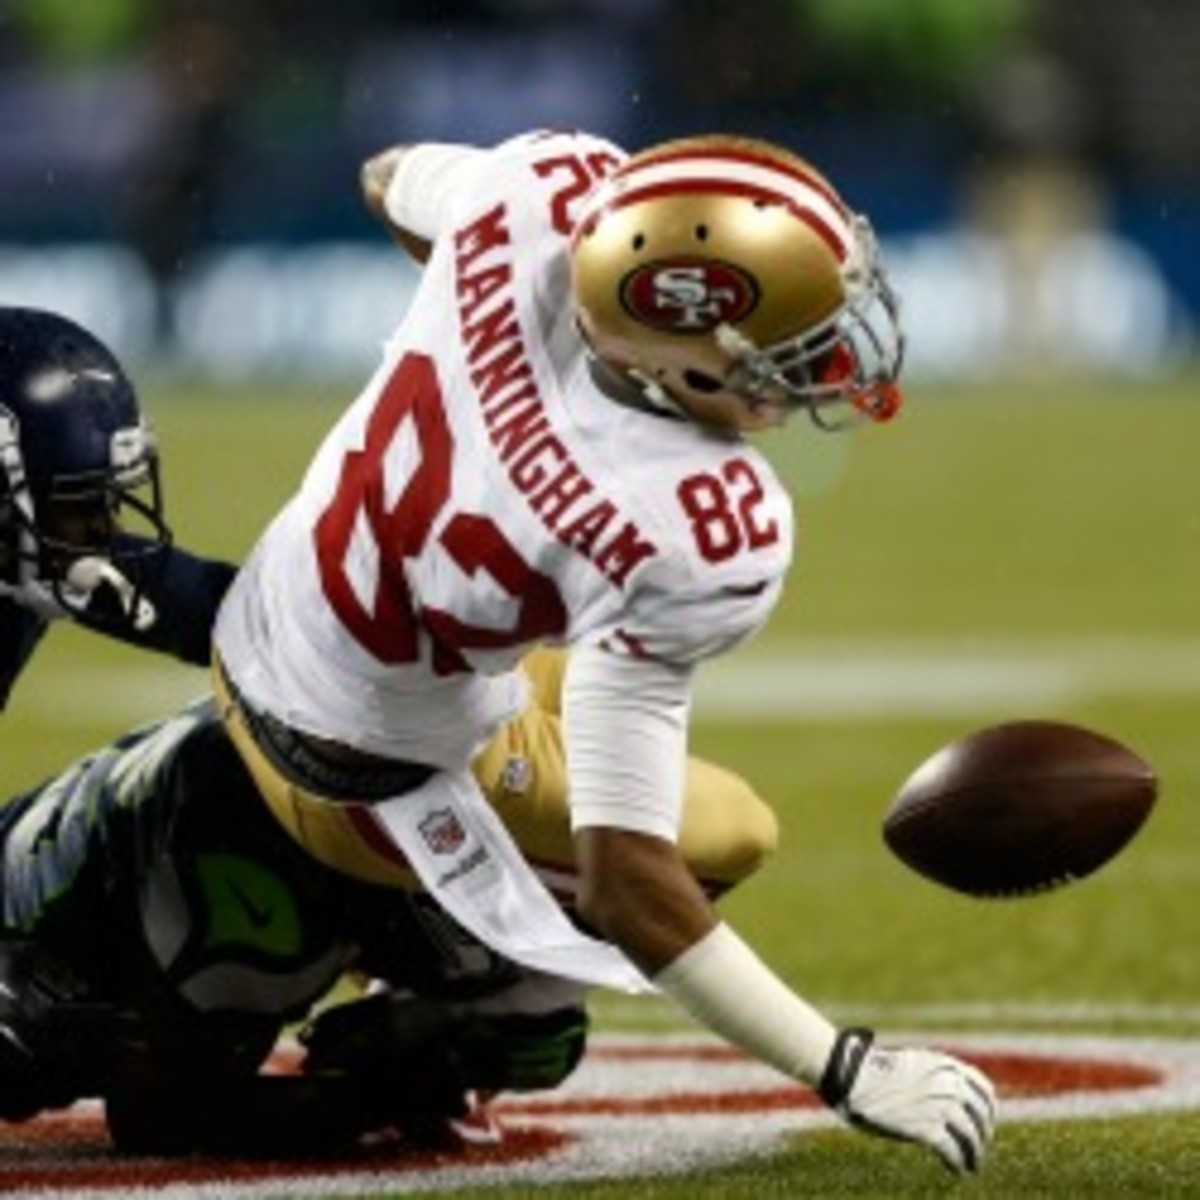 49ers wideout Mario Manningham will miss the remainder of the season with a knee injury. (Otto Grutele/Getty Images)